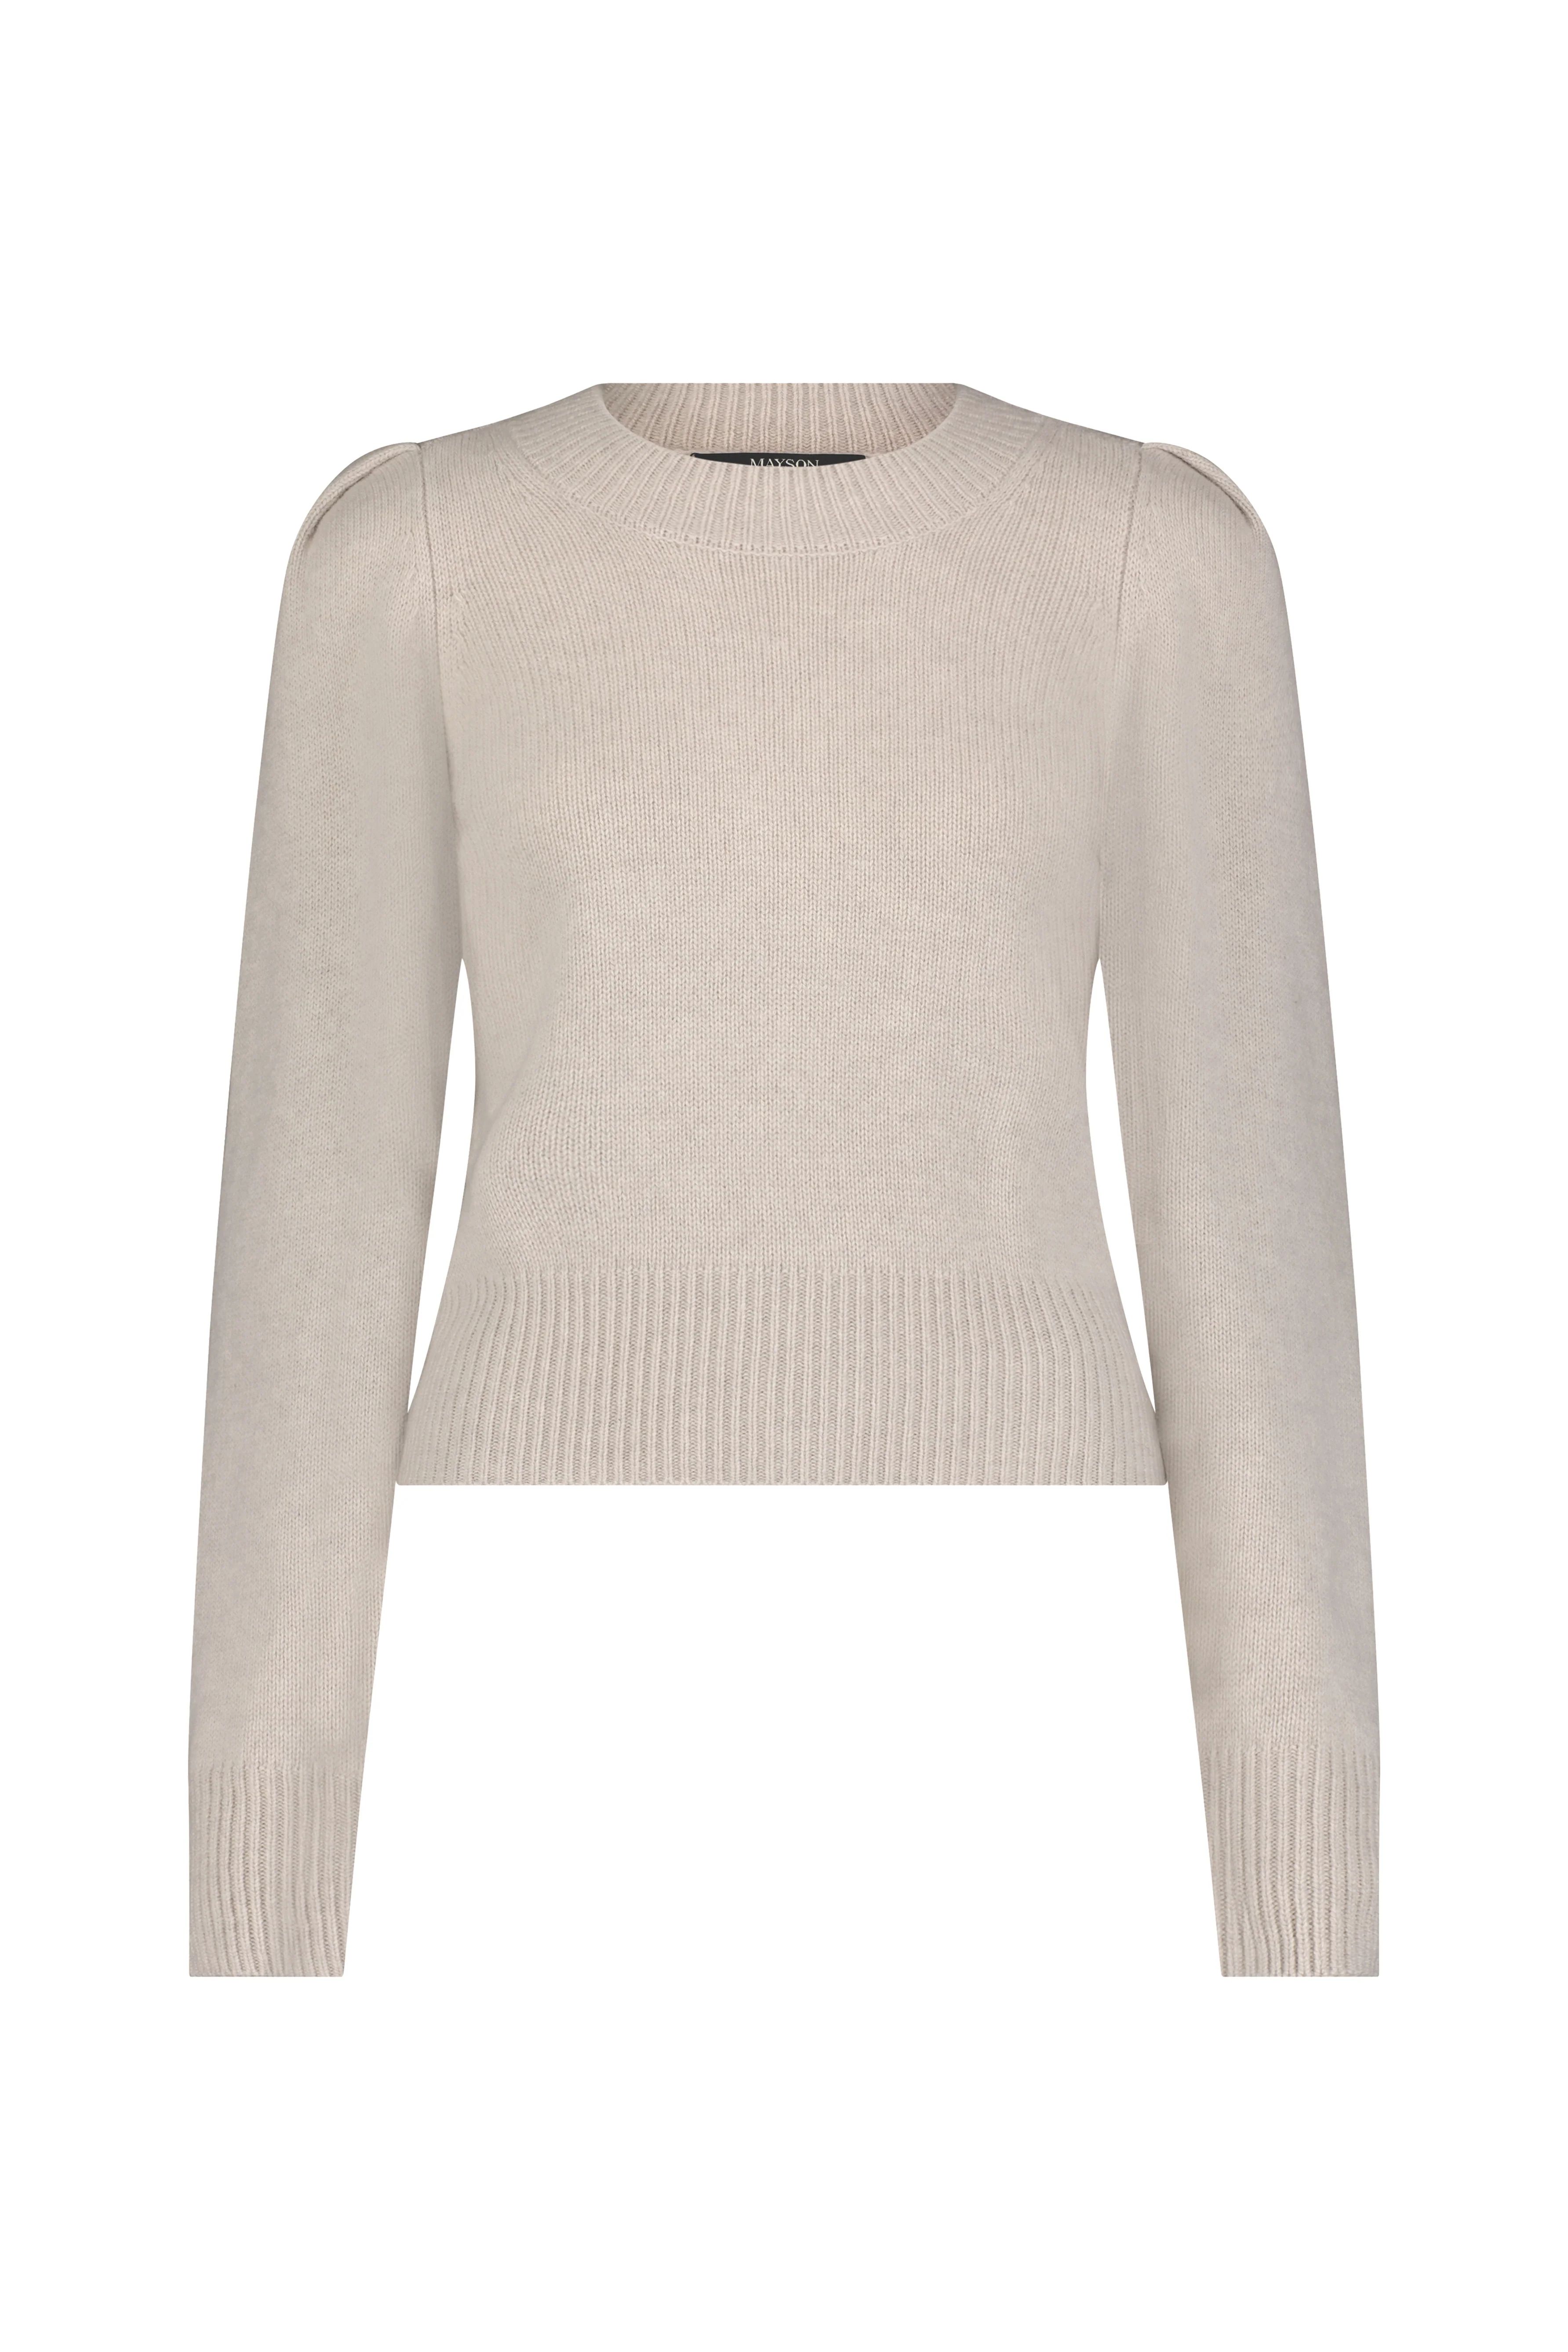 Wool Cashmere Puff Sleeve Sweater | MAYSON the label